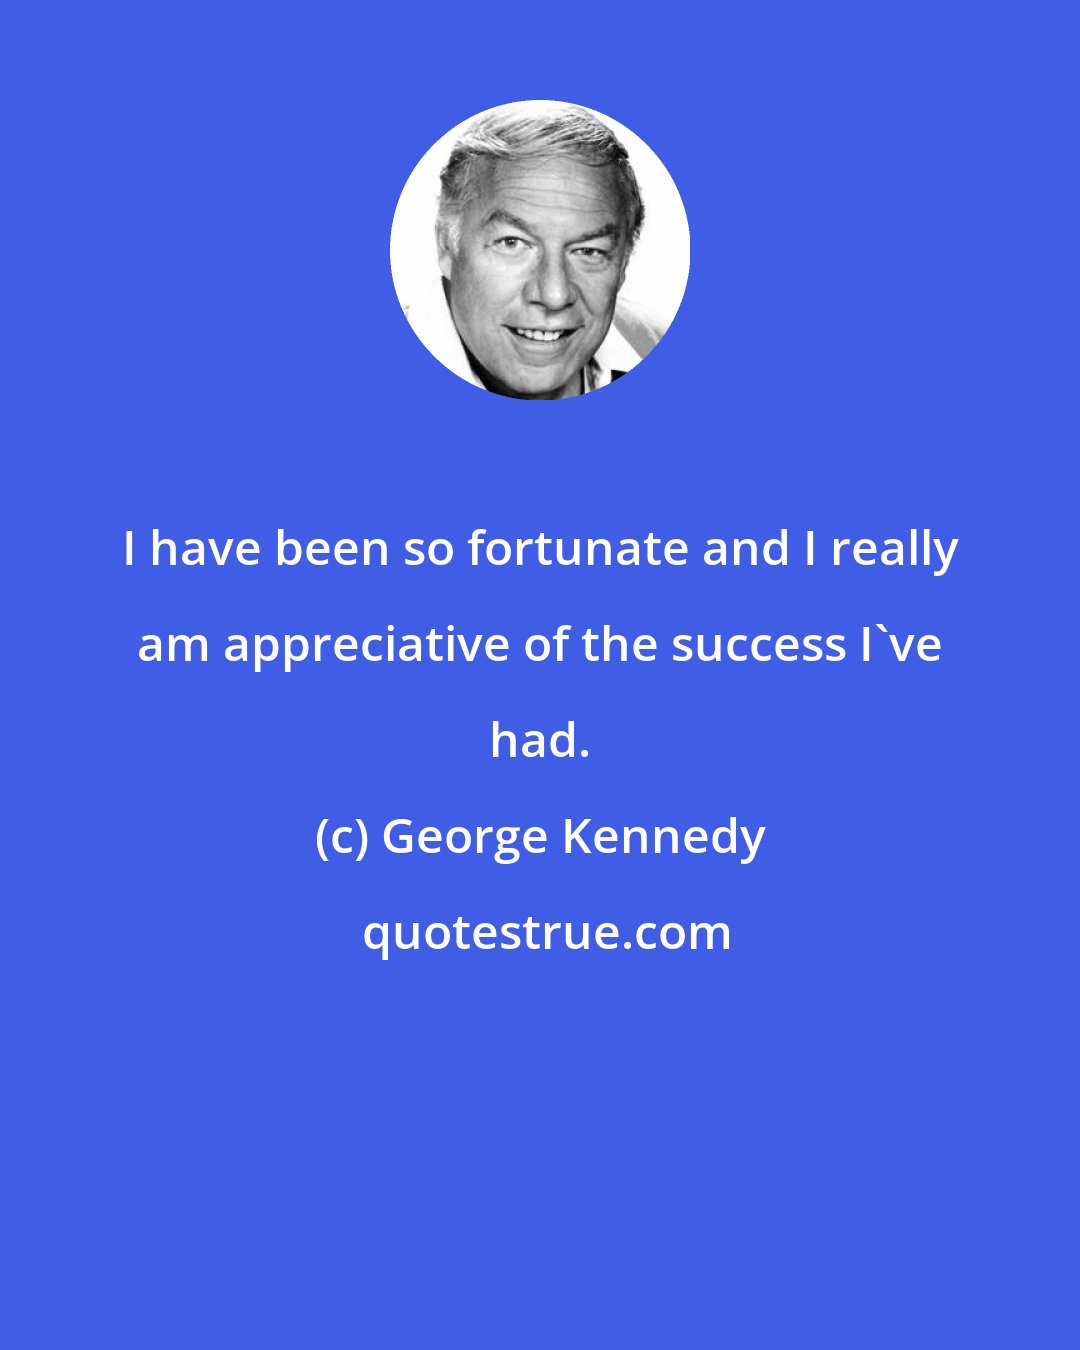 George Kennedy: I have been so fortunate and I really am appreciative of the success I've had.